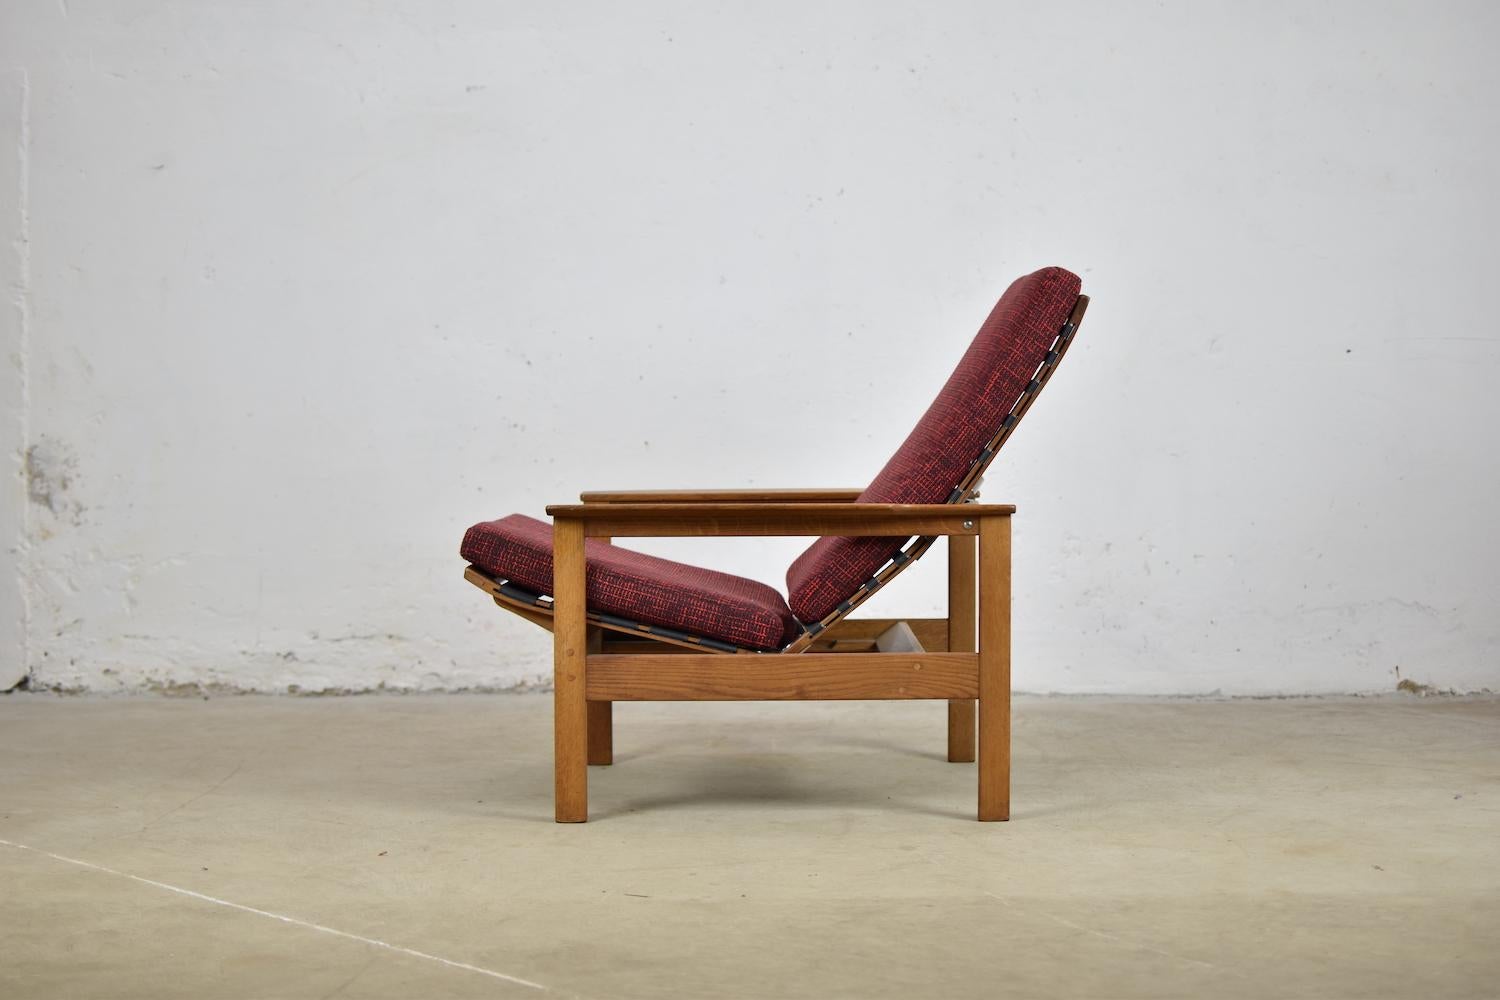 Rare pair of modernist lounge chairs by Georges Vanrijk for Beaufort, Belgium, 1960s. This set is made out of oak and fabric. The construction of the chairs allows for a slight rocking motion if wanted. They are extremely comfortable and beautiful